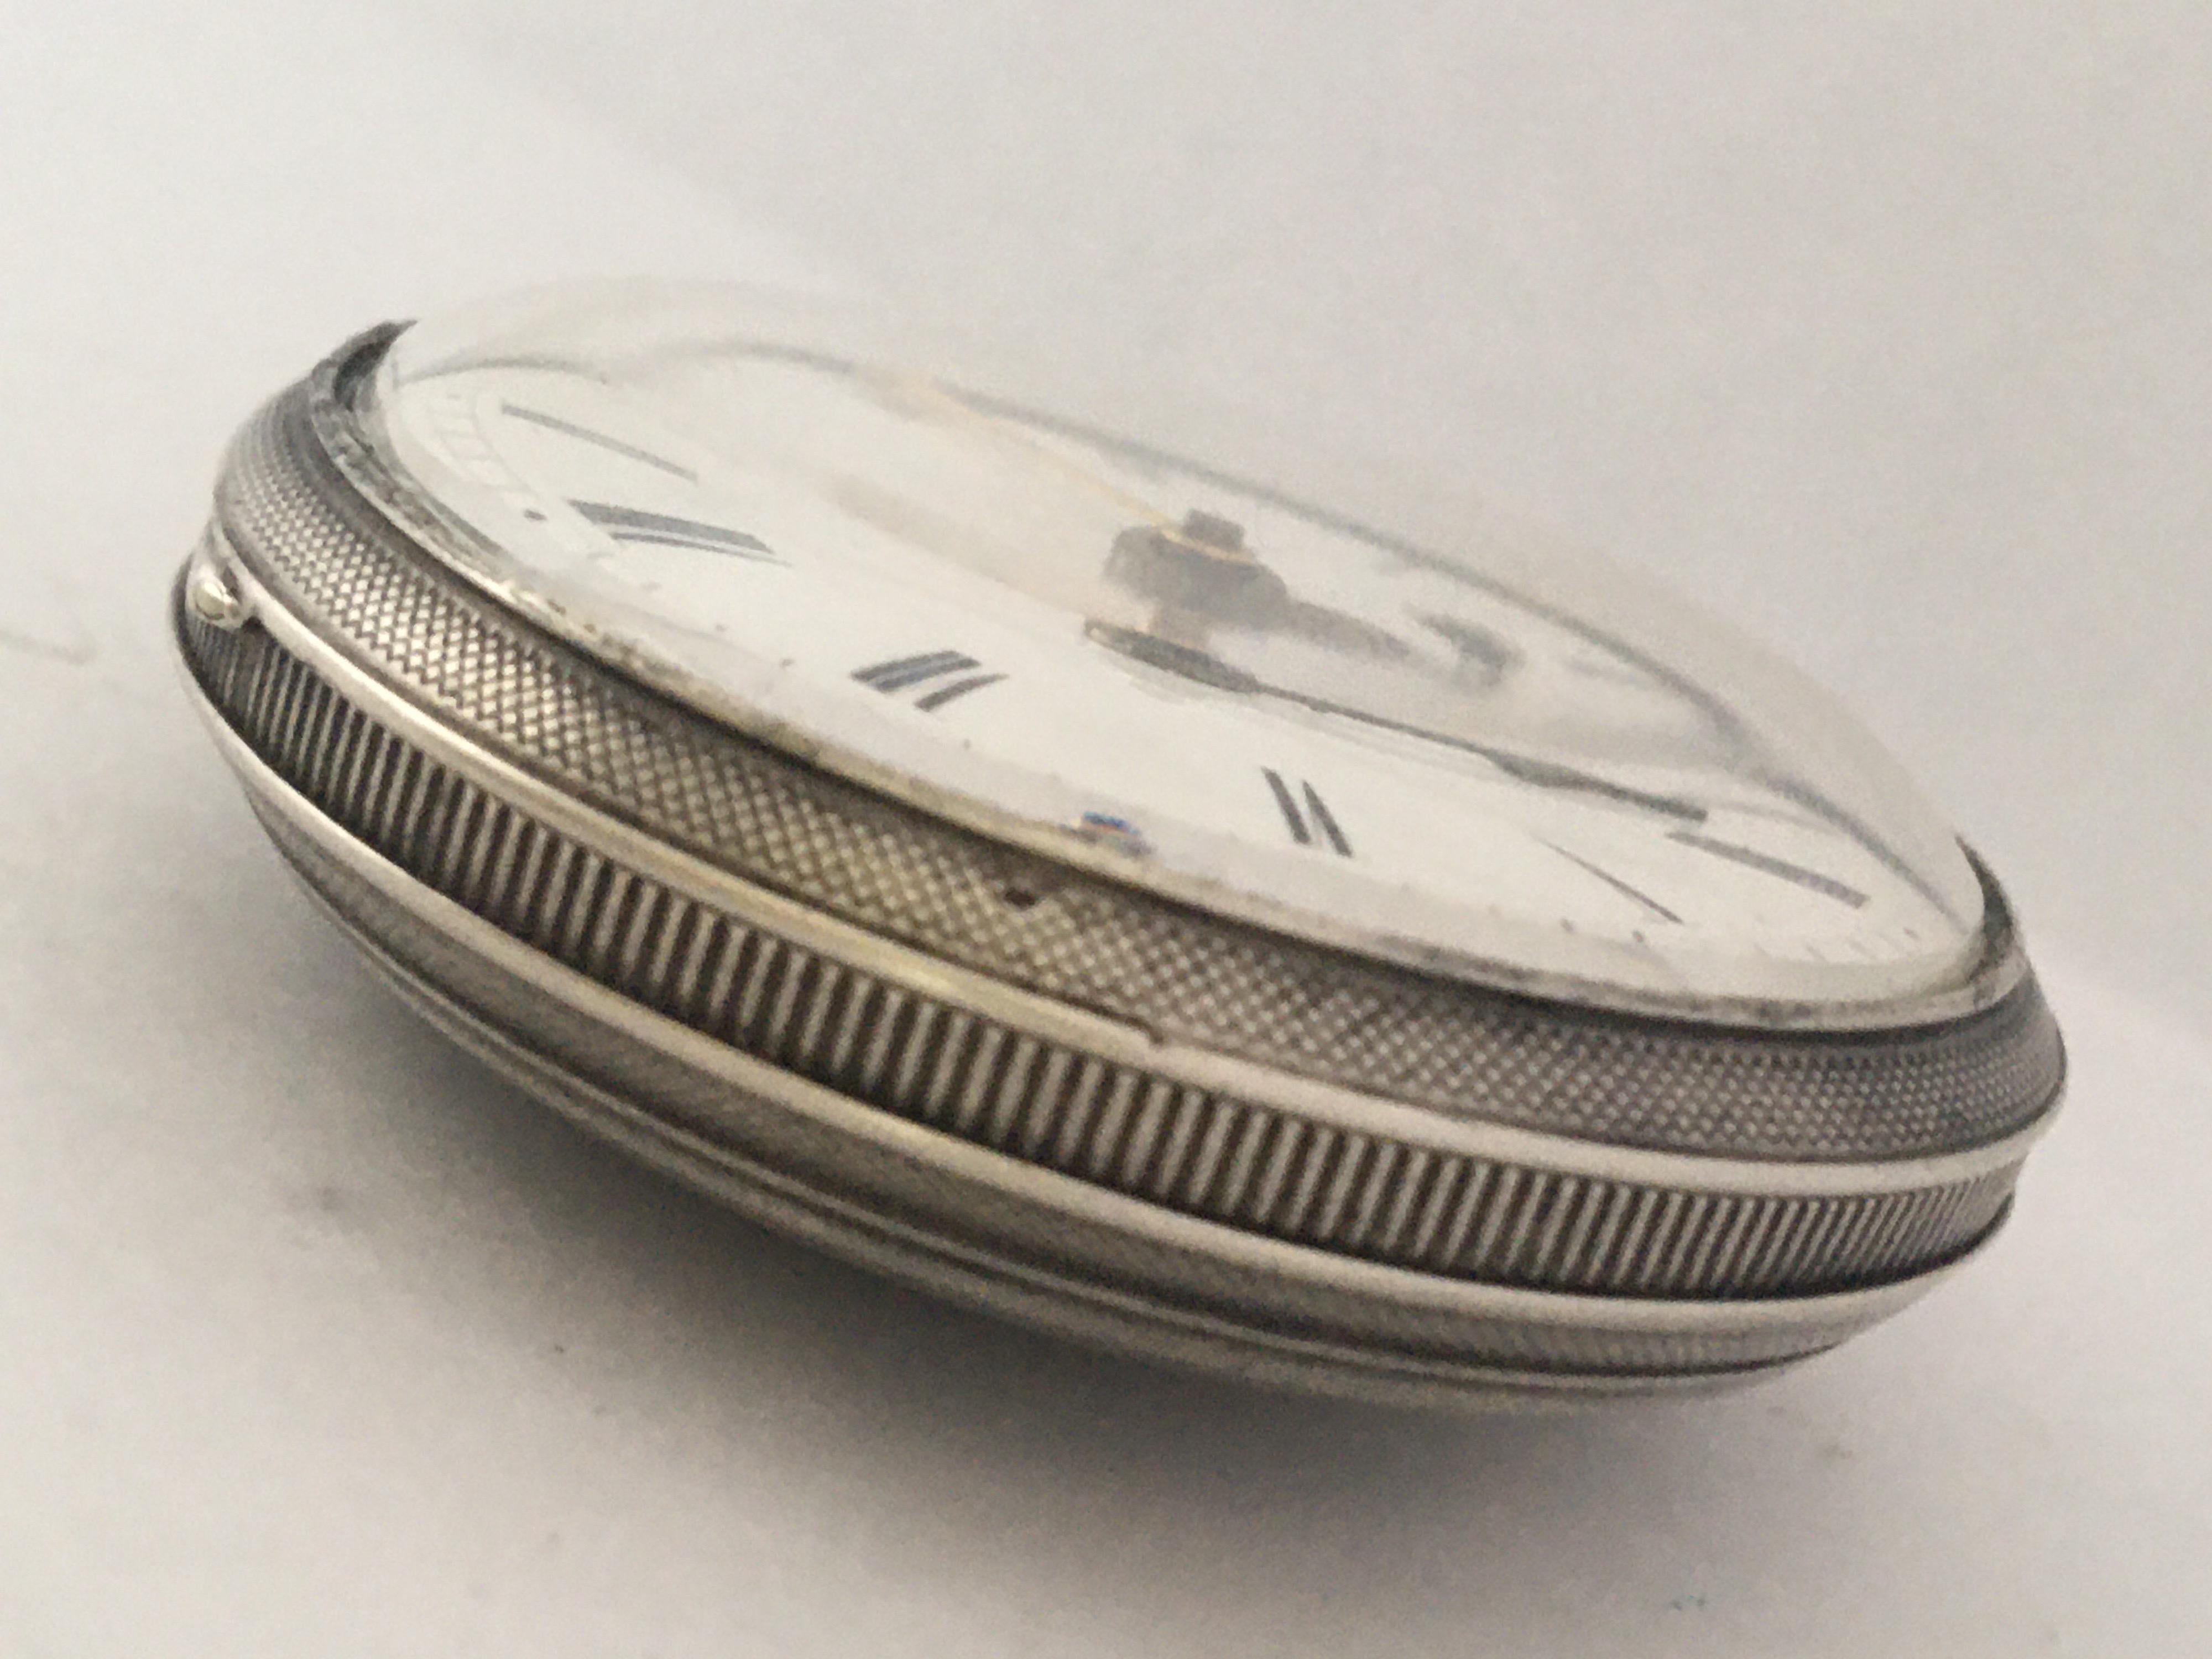 Early Rare Verge Fusee Silver Pocket Watch For Sale 6